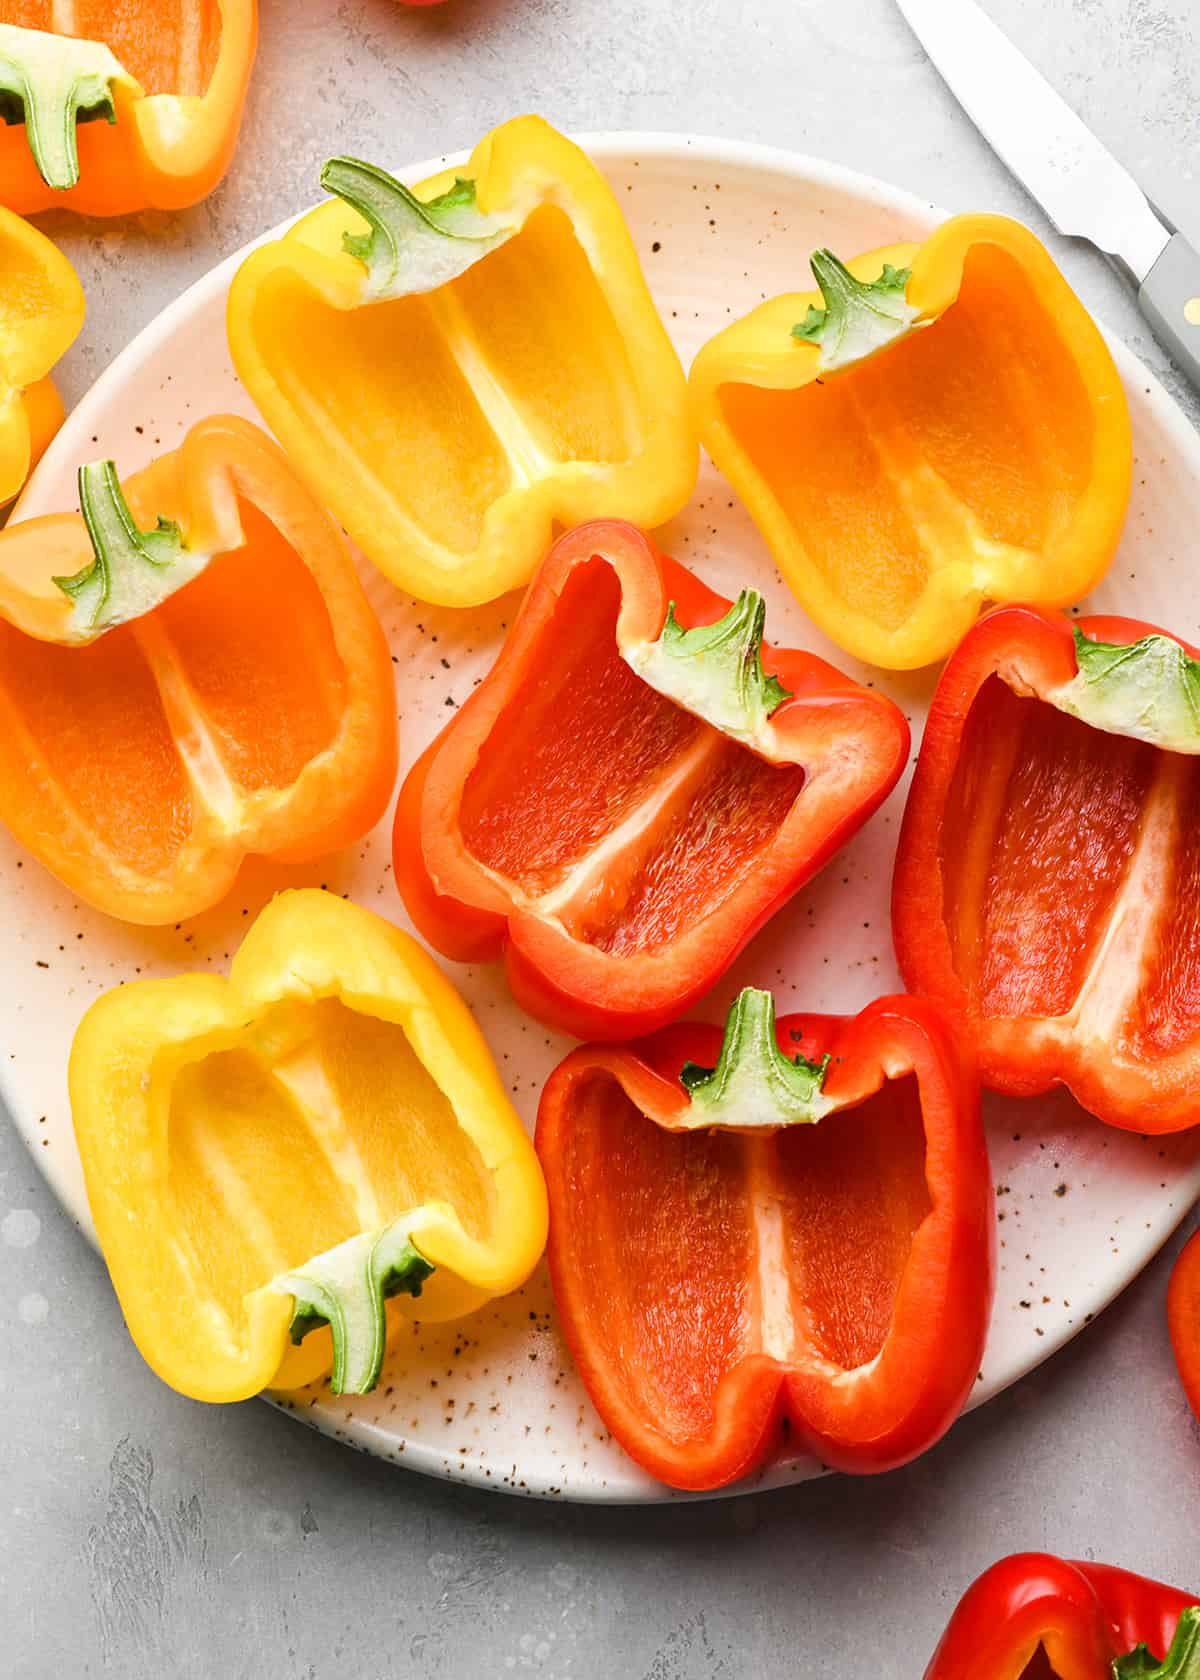 How to Make Stuffed Peppers - 9 bell pepper halves on a plate